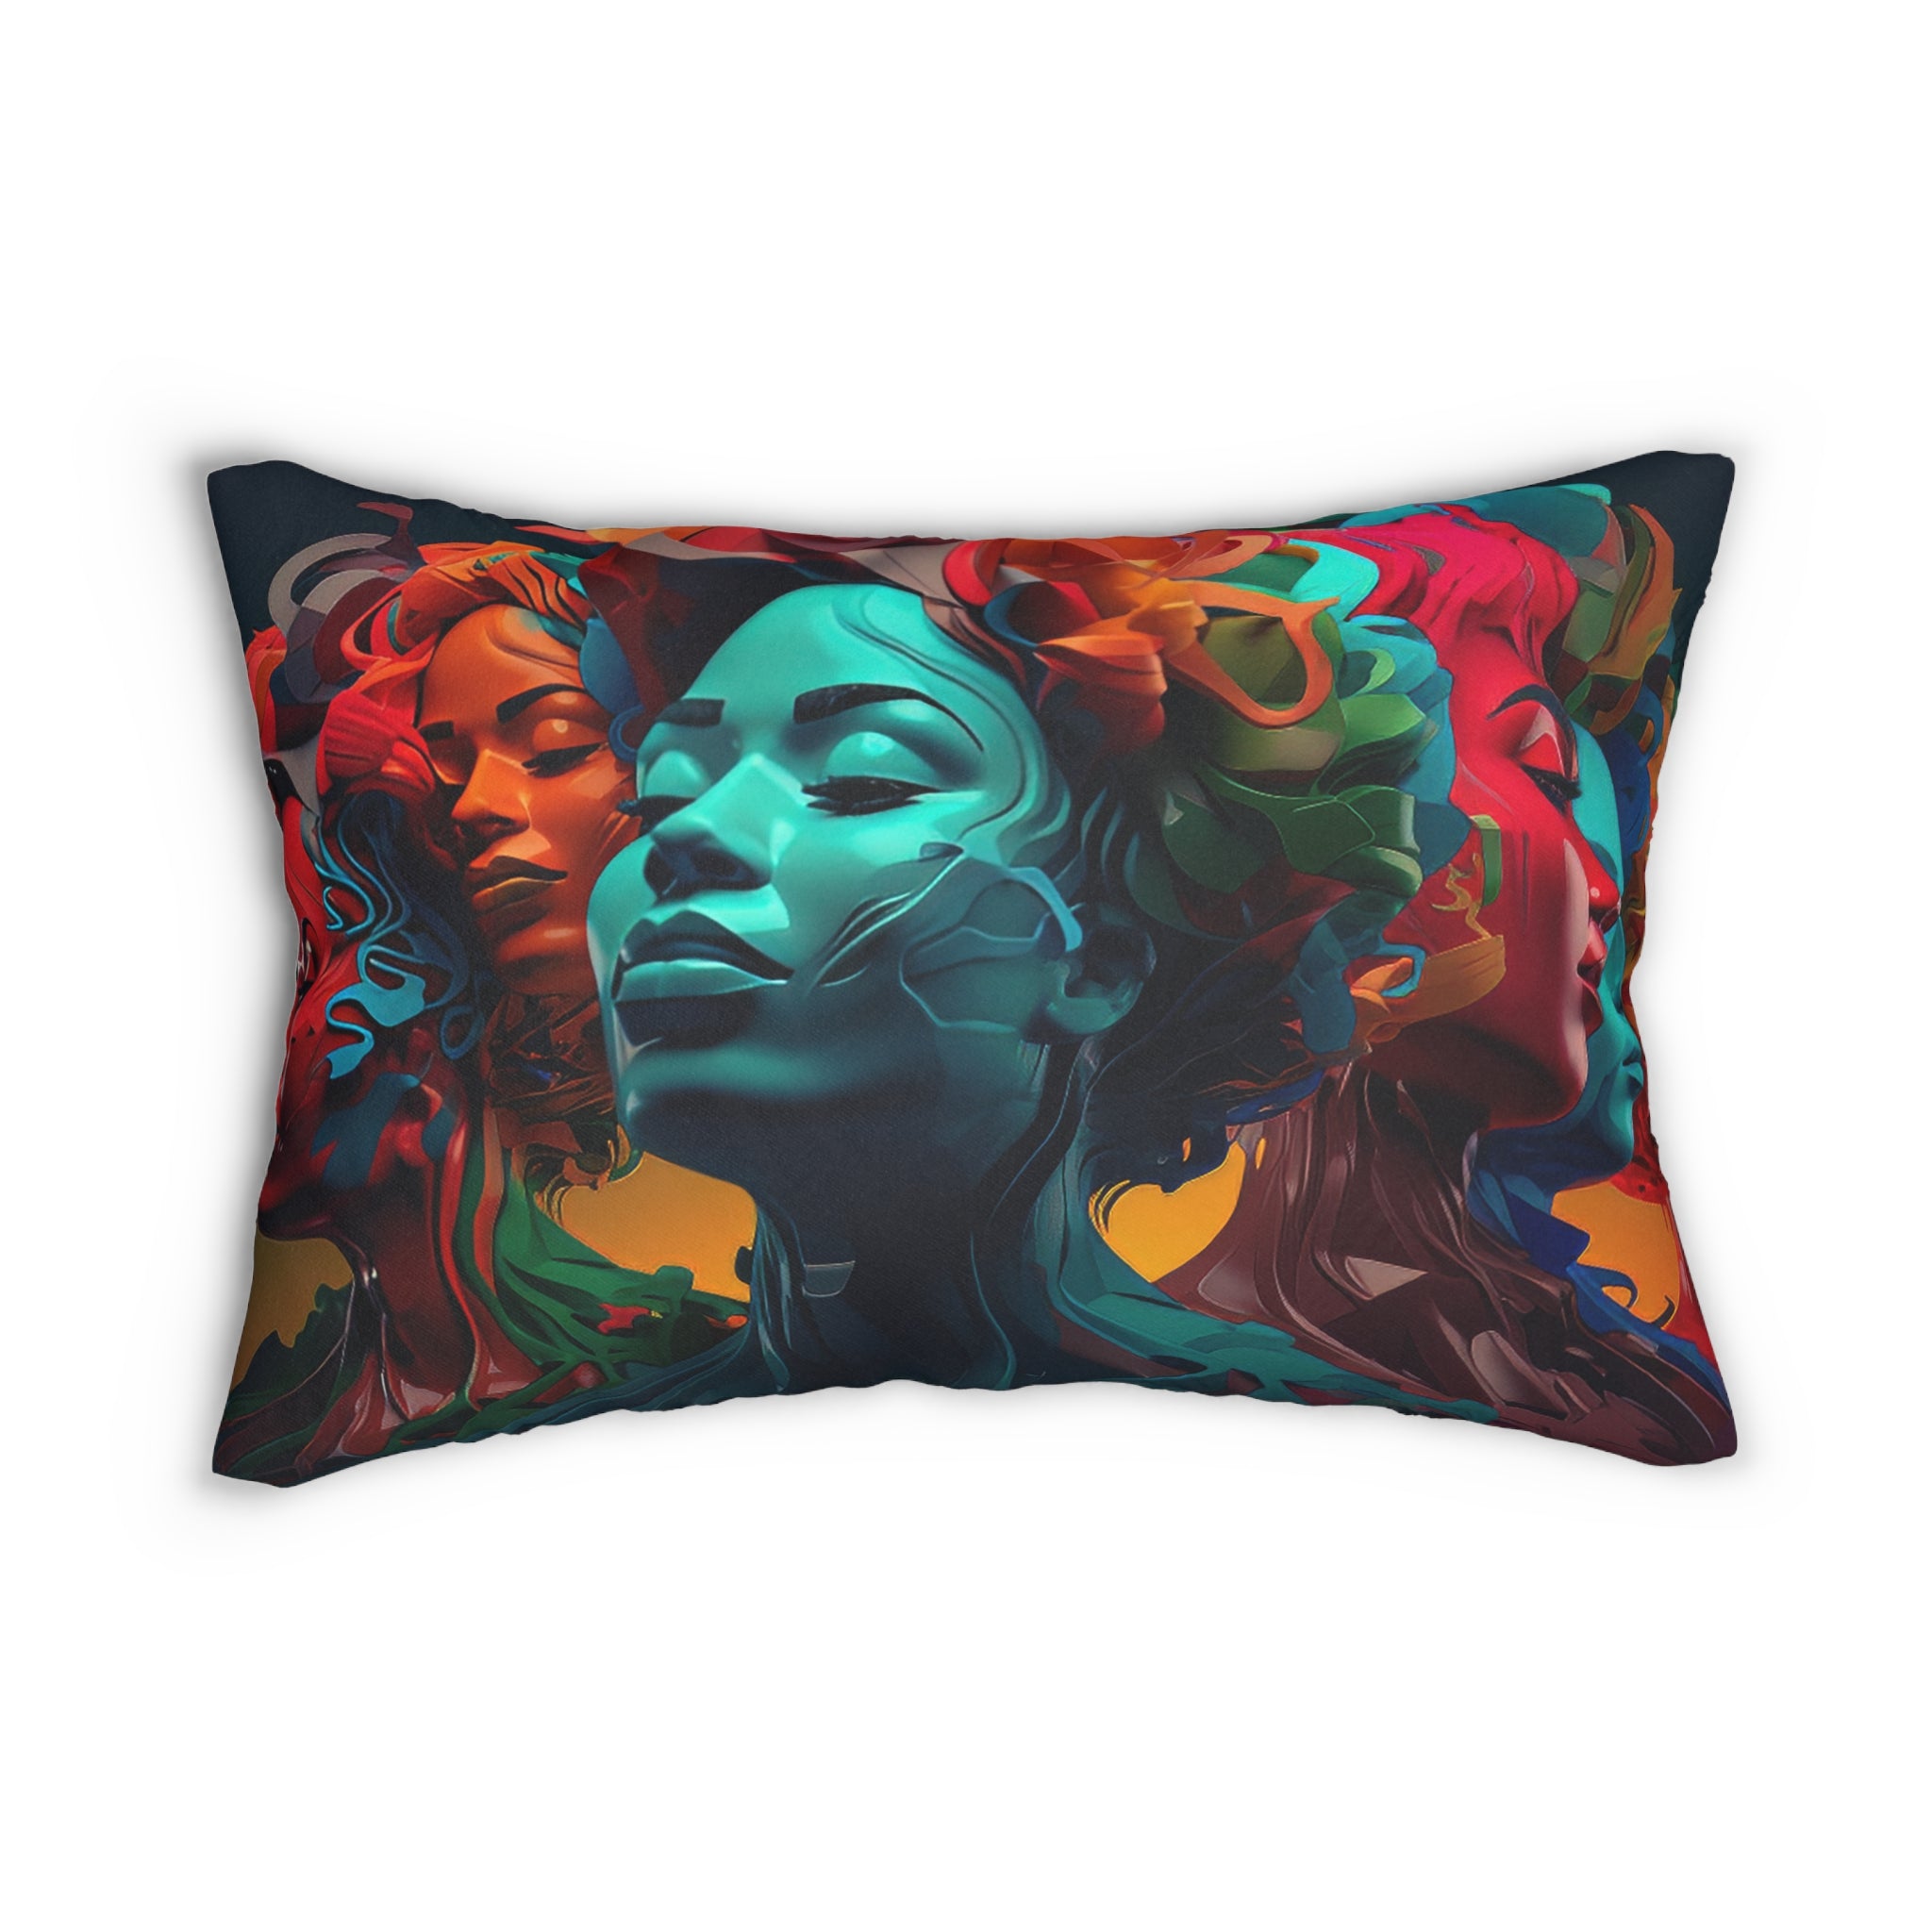 "COLOR OF BEAUTY" - African American Themed Lumbar Pillow